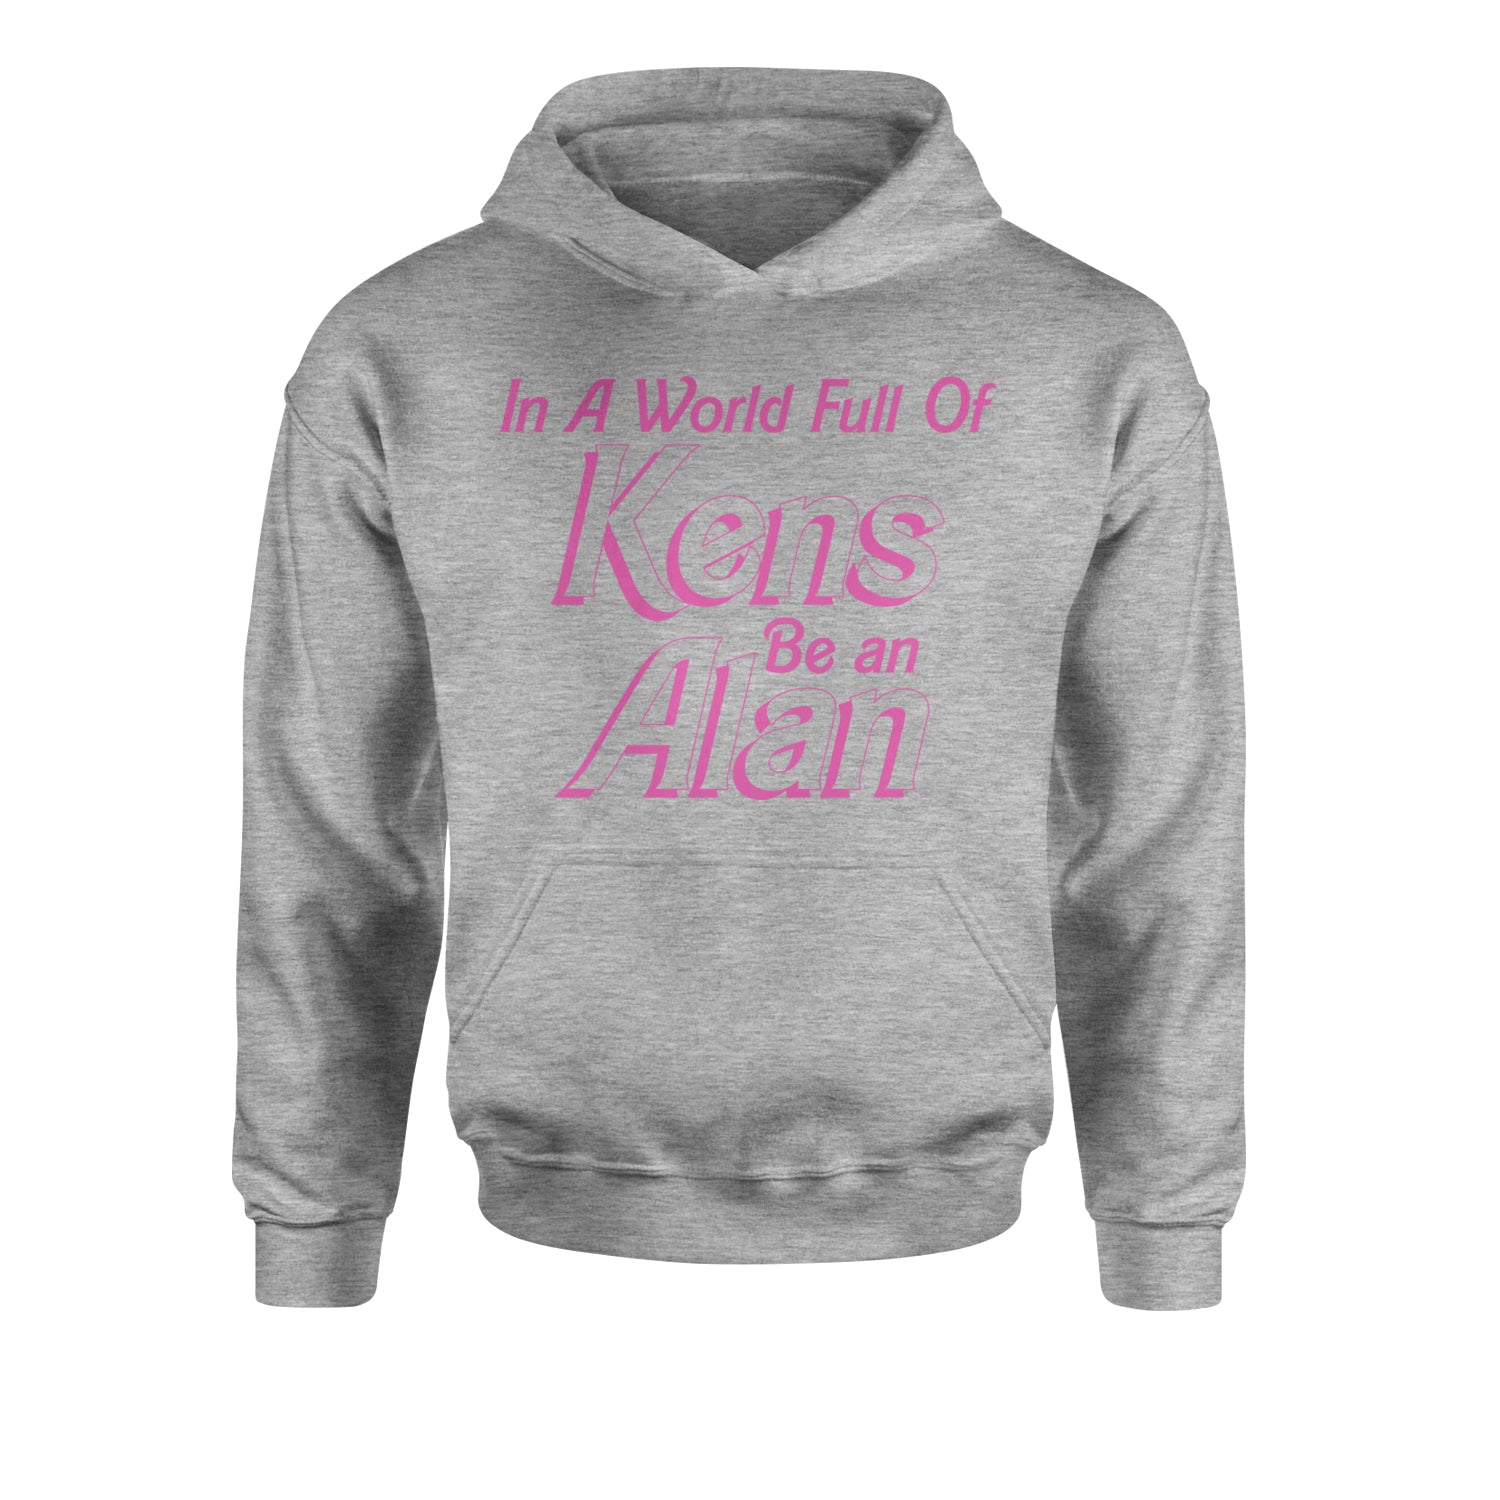 In A World Full Of Kens, Be an Alan Youth-Sized Hoodie